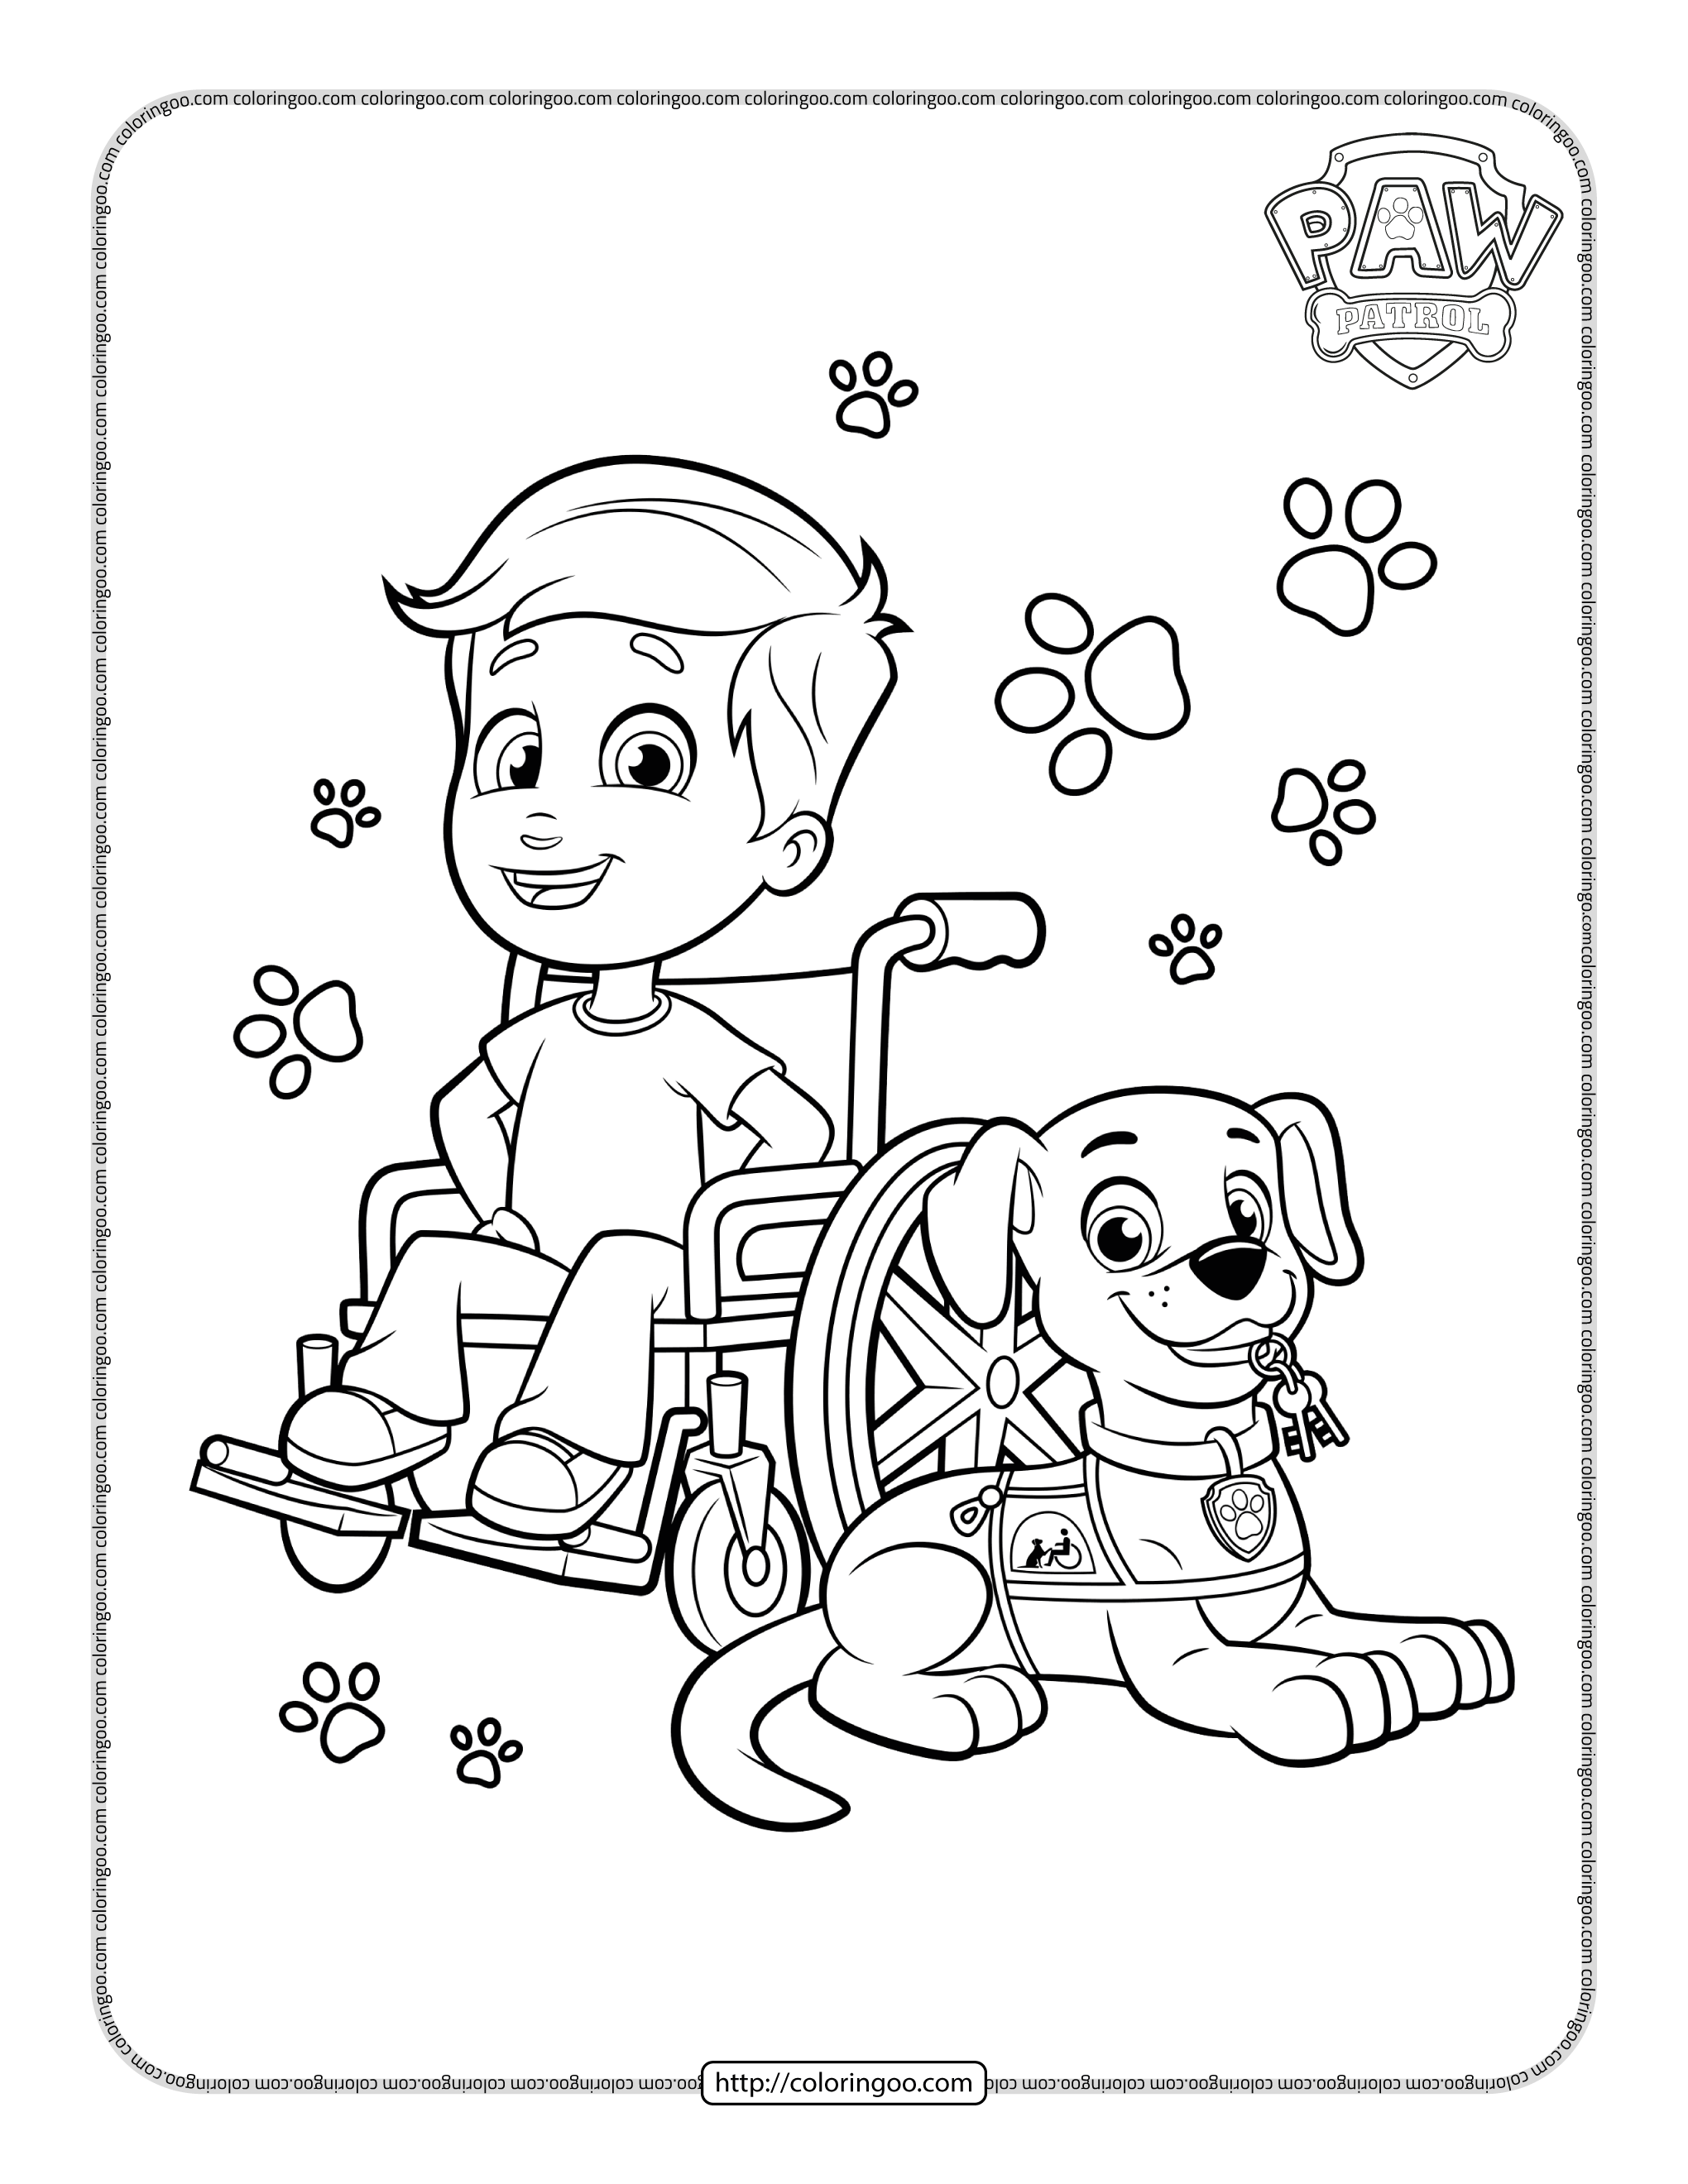 assistant puppy best friend coloring page